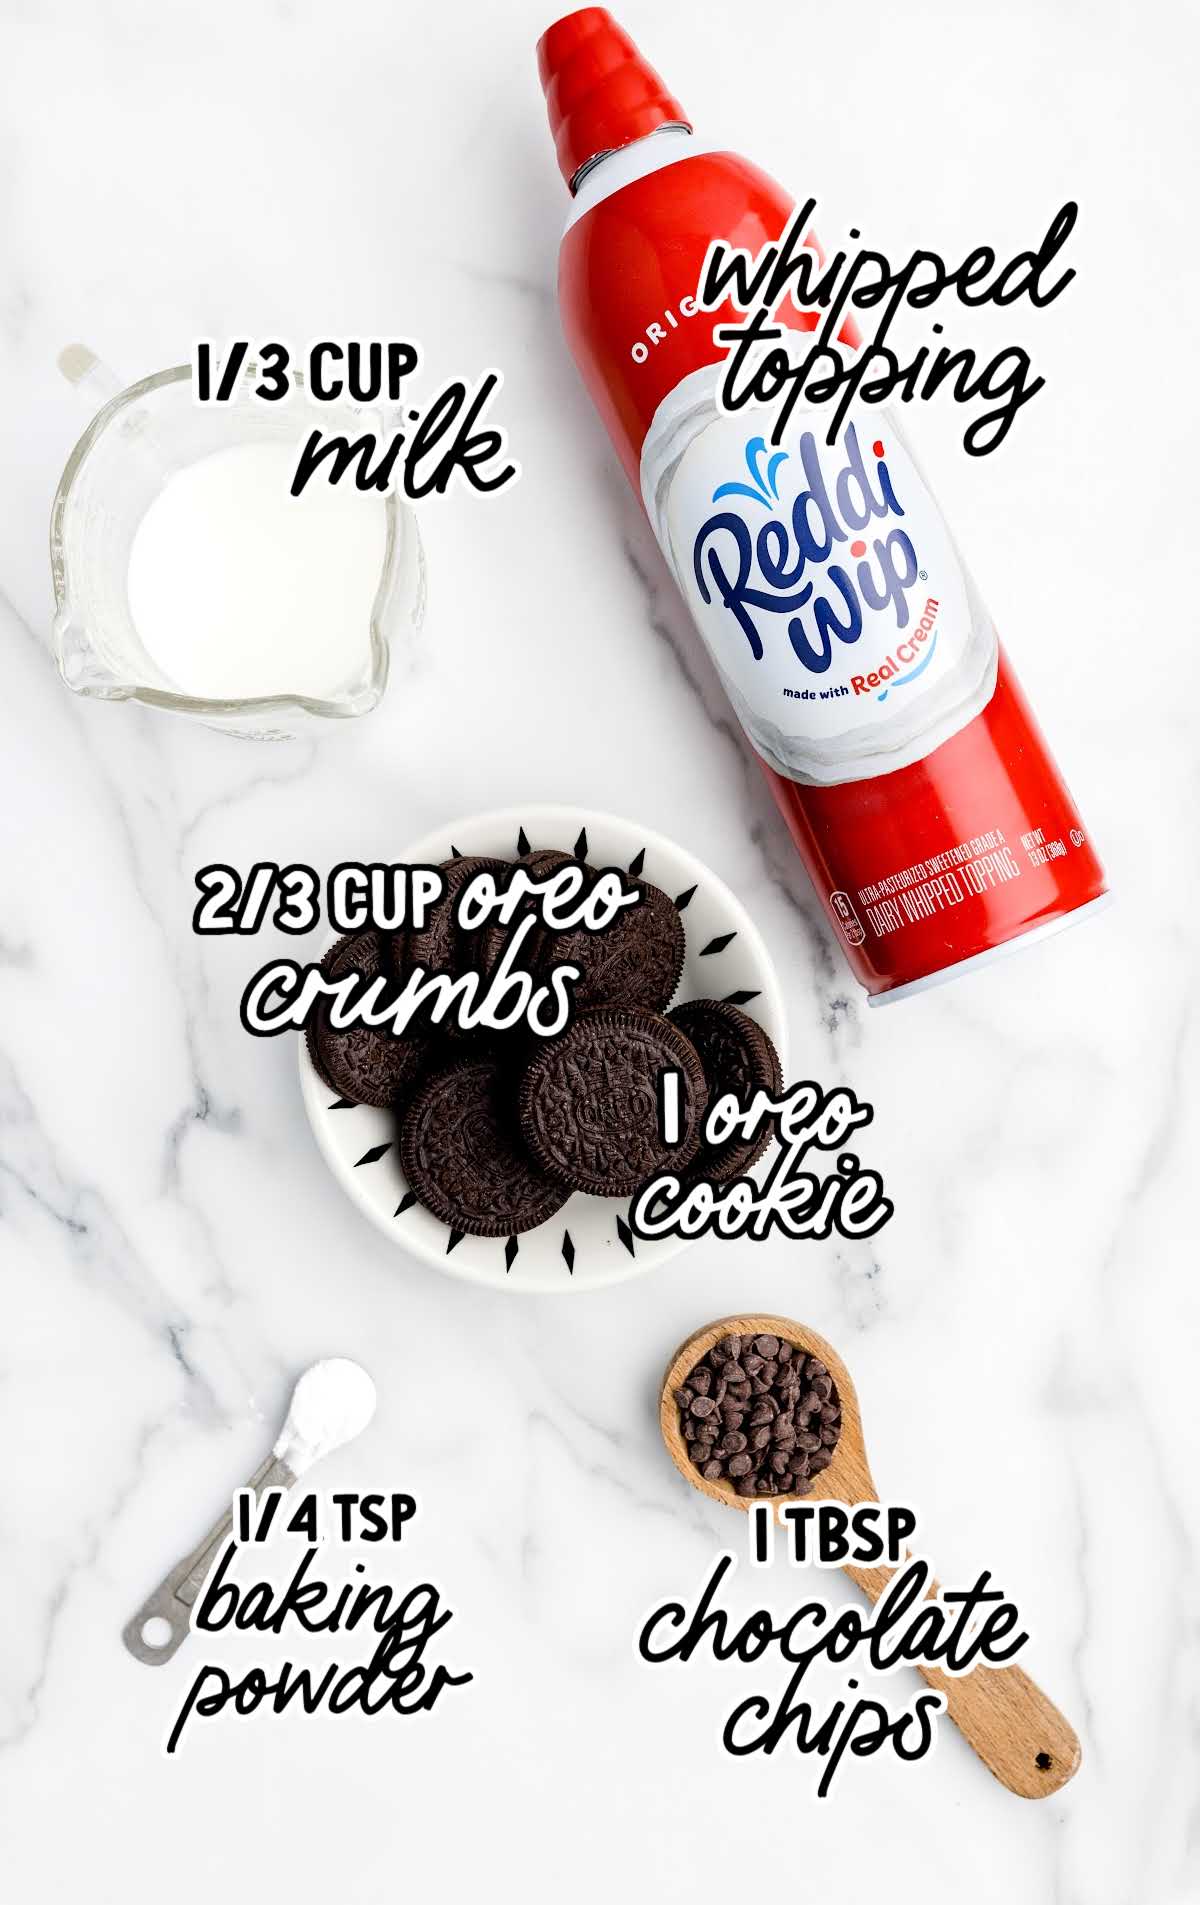 Oreo Cake in a Mug raw ingredients that are labeled